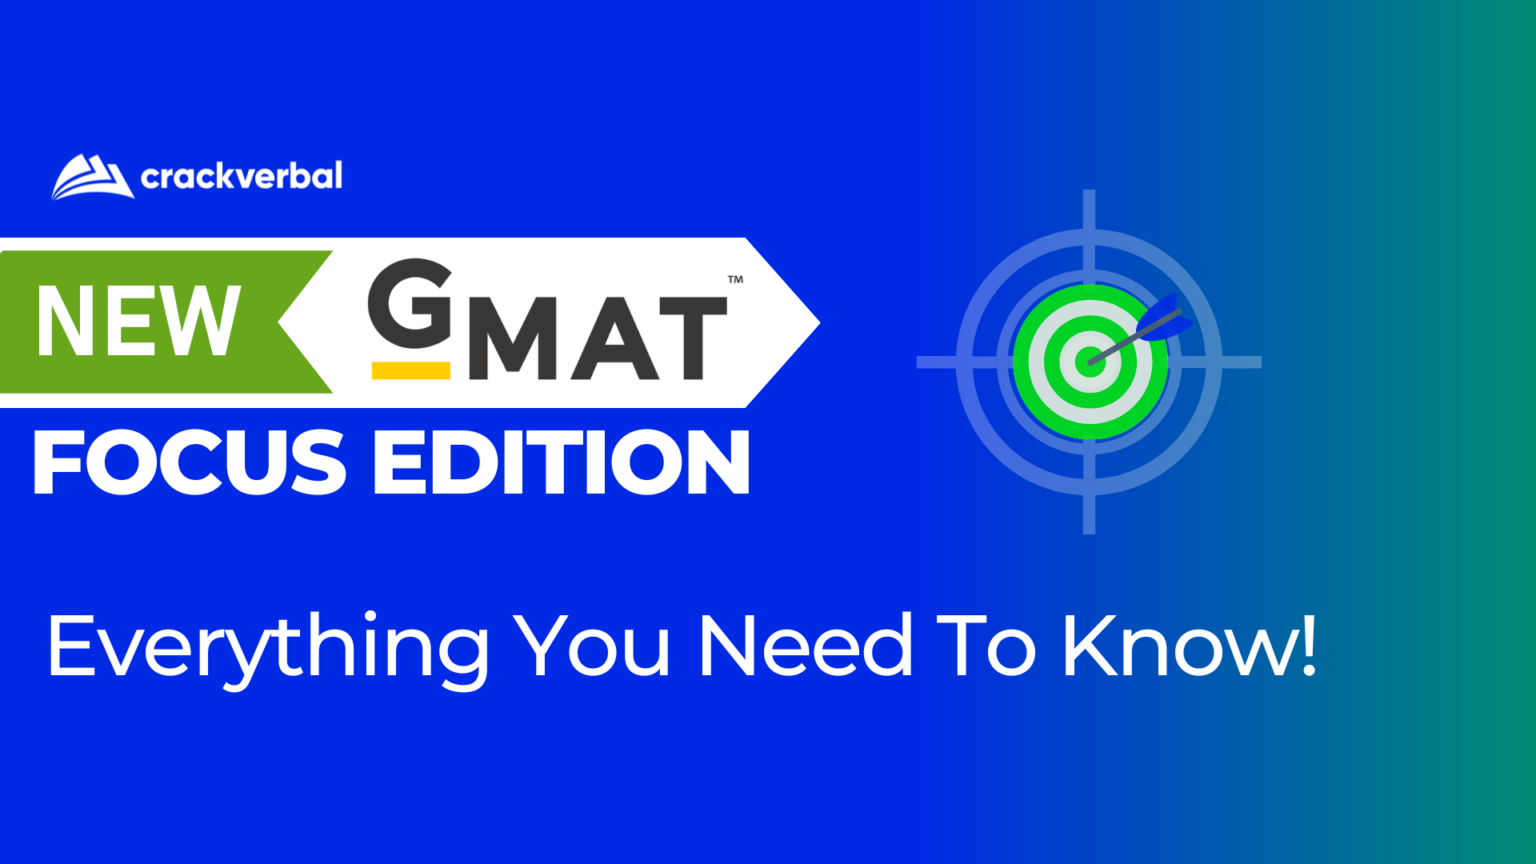 GMAT Focus Edition vs Current GMAT 7 Differences You Should Know